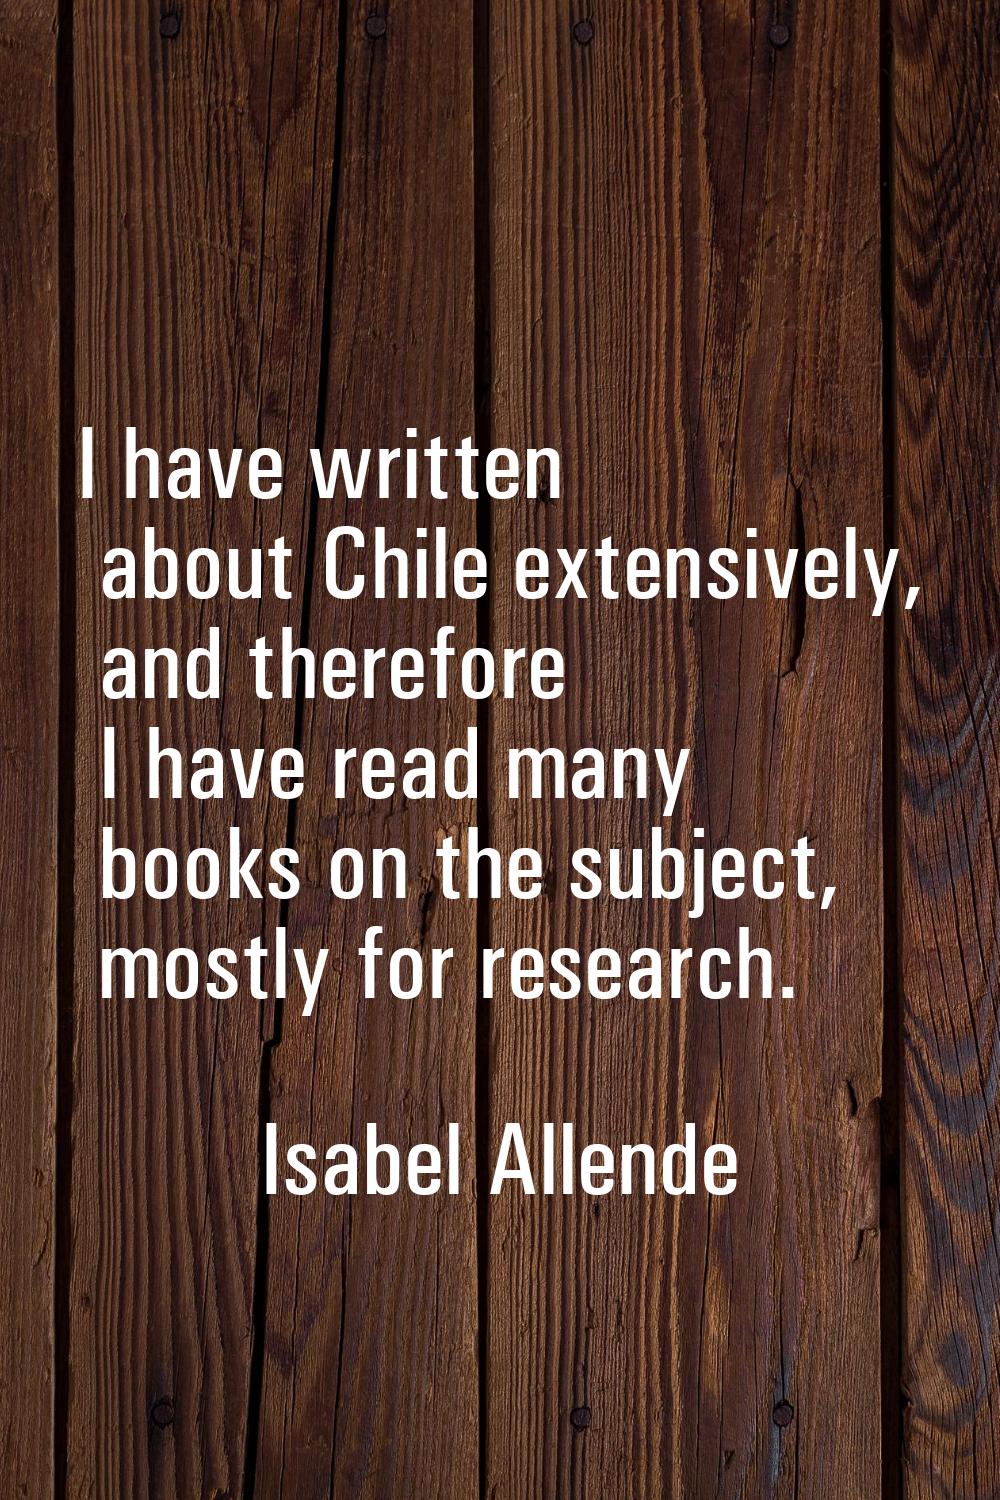 I have written about Chile extensively, and therefore I have read many books on the subject, mostly